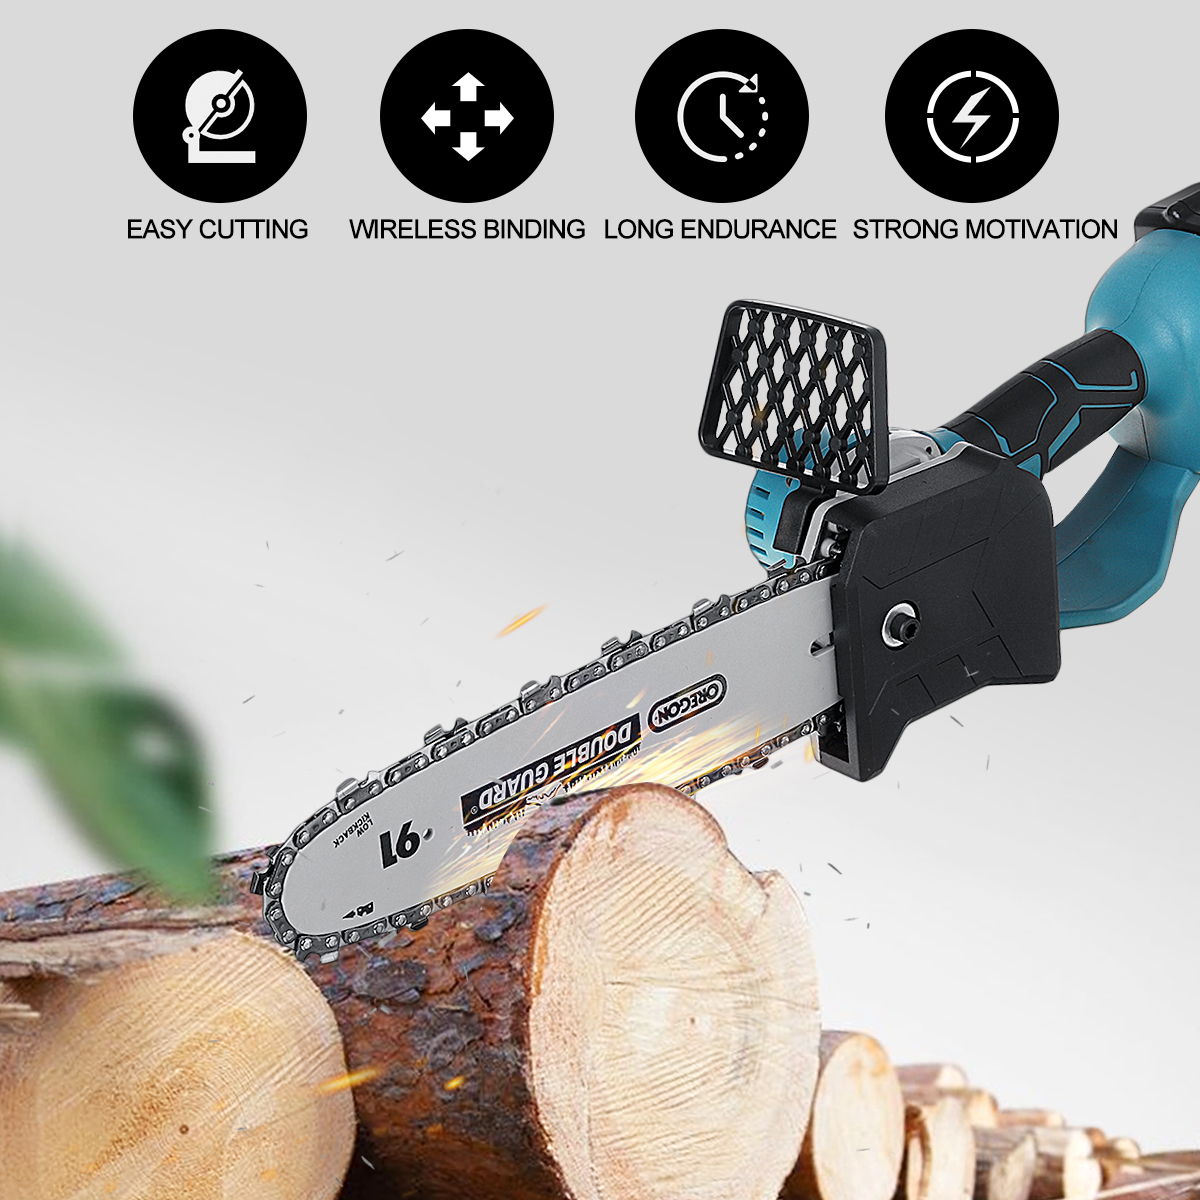 Doersupp-21V-Cordless-Electric-Chain-Saw-Wood-Mini-Cutter-One-Hand-Saw-Woodworking-Tool-1814645-5